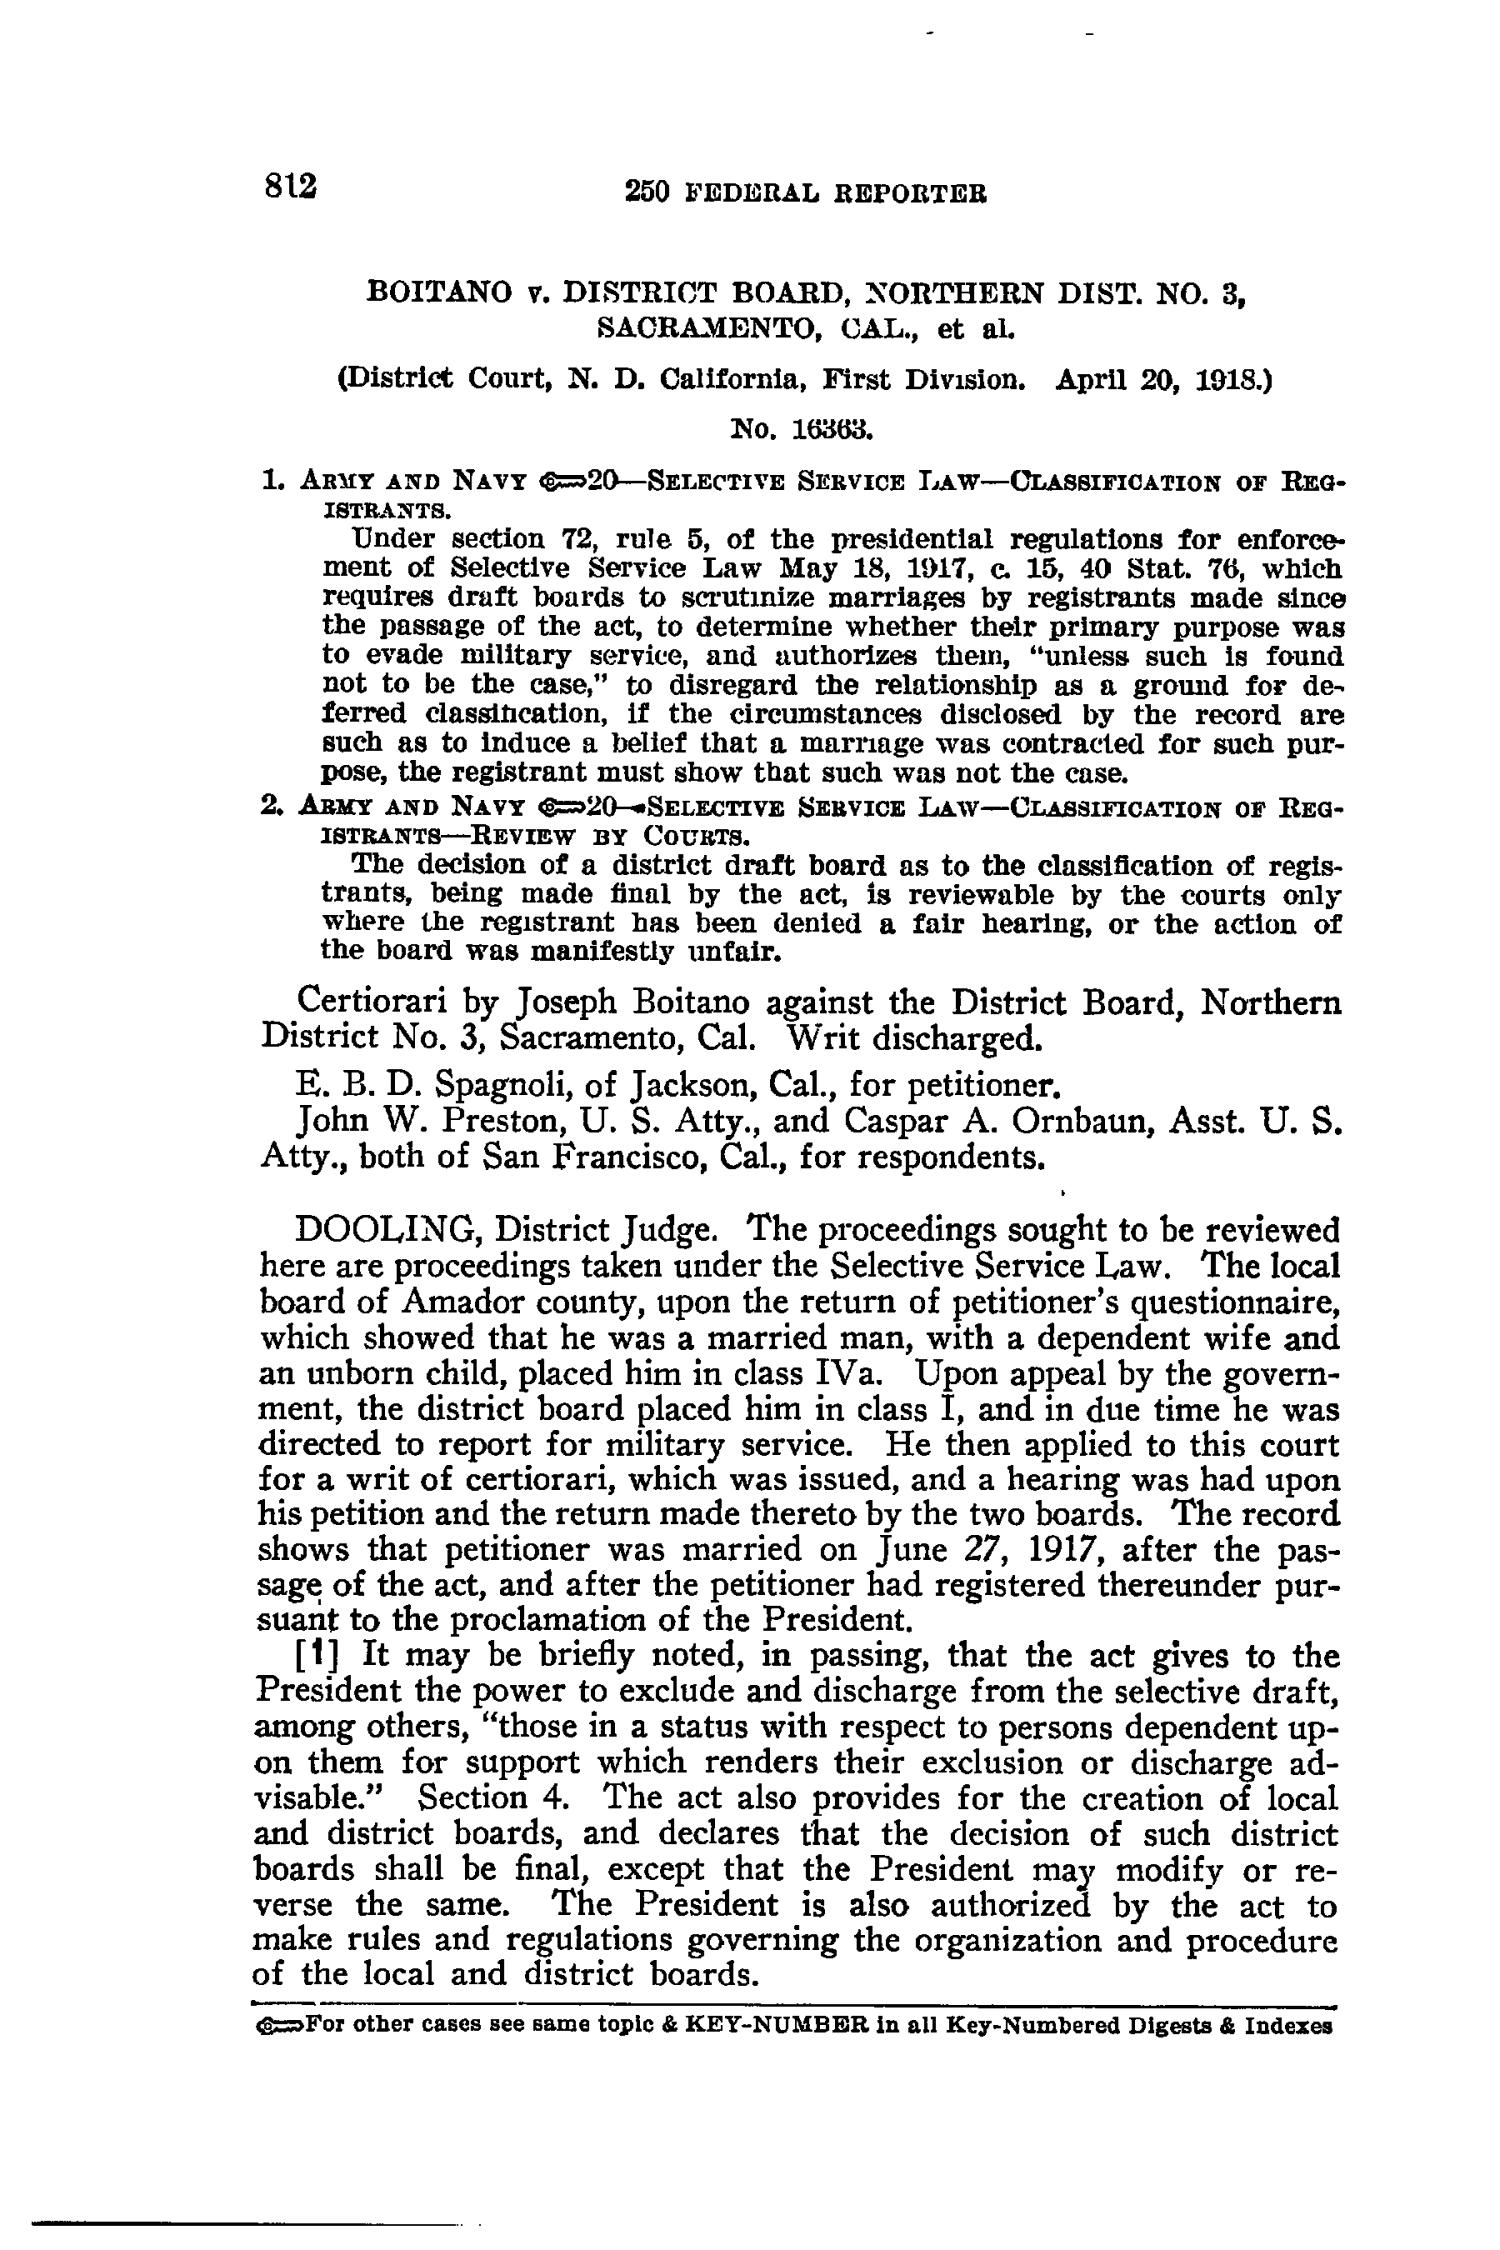 The Federal Reporter with Key-Number Annotations, Volume 250: Cases Argued and Determined in the Circuit Courts of Appeals and District Courts of the United States, August-October, 1918.
                                                
                                                    812
                                                